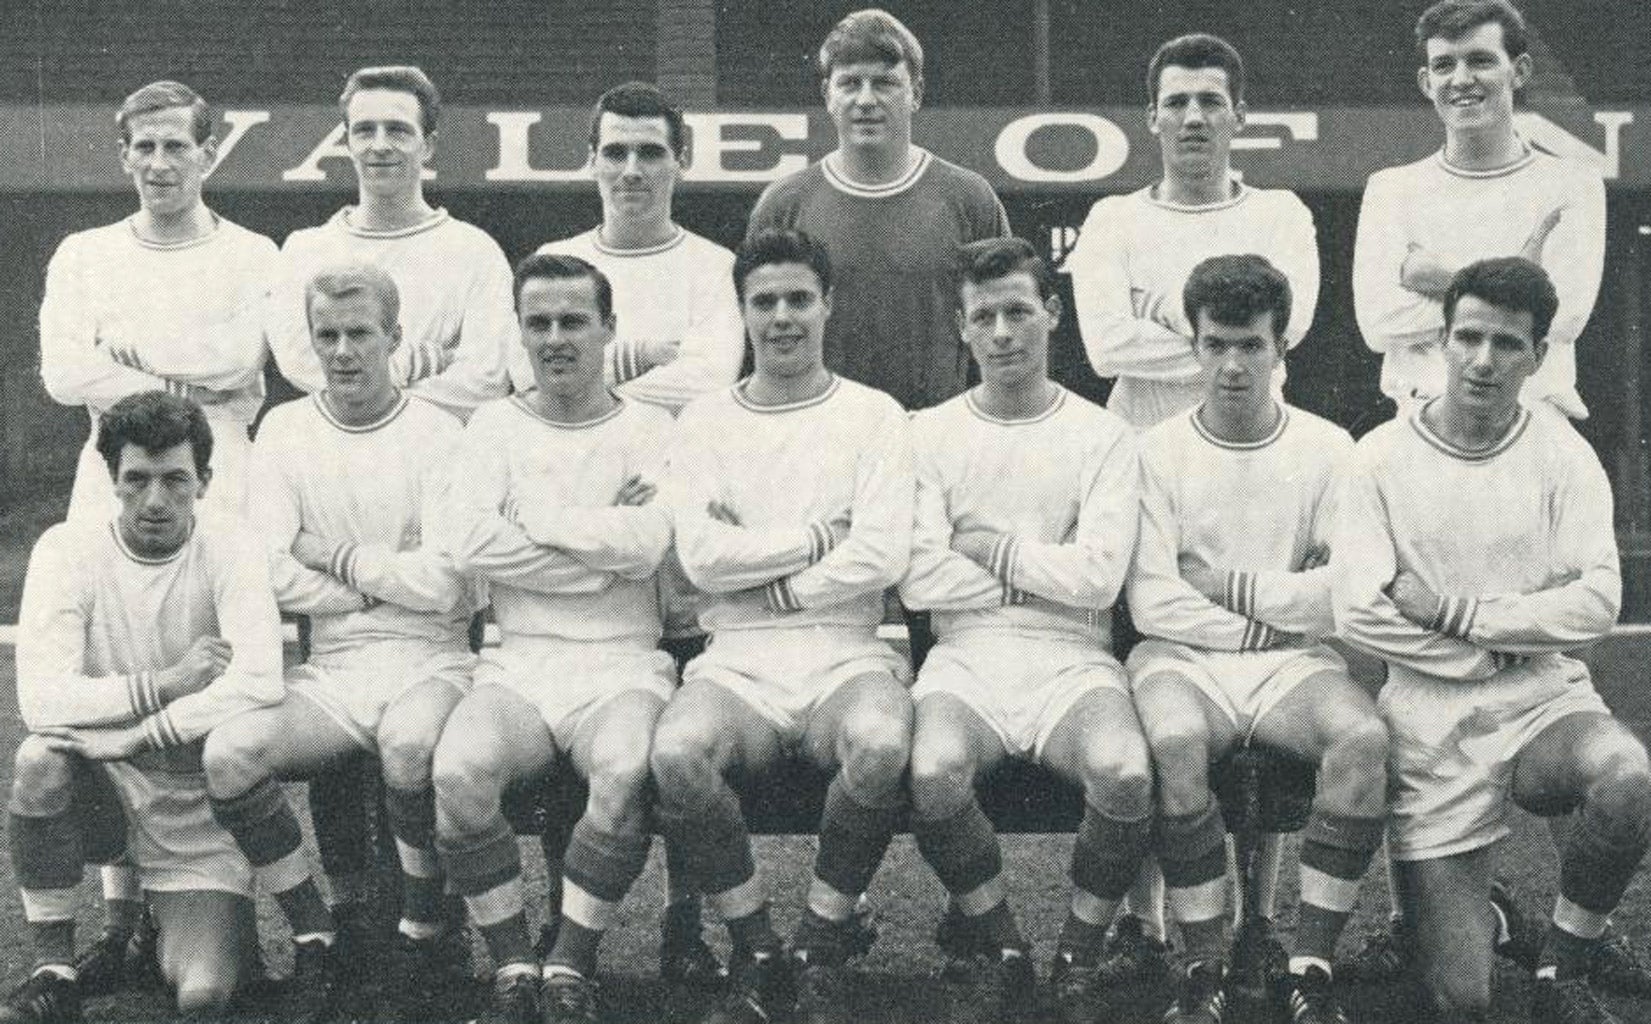 The Swansea Town side of 1963-64 from the match programme for the Preston North End tie. Top row from left to right: Thomas, Hughes, R Evans, Dwyer, Purcell, Williams. Front row: Reynolds (did not play), Jones, Todd, Johnson, Draper, B Evans (did not play